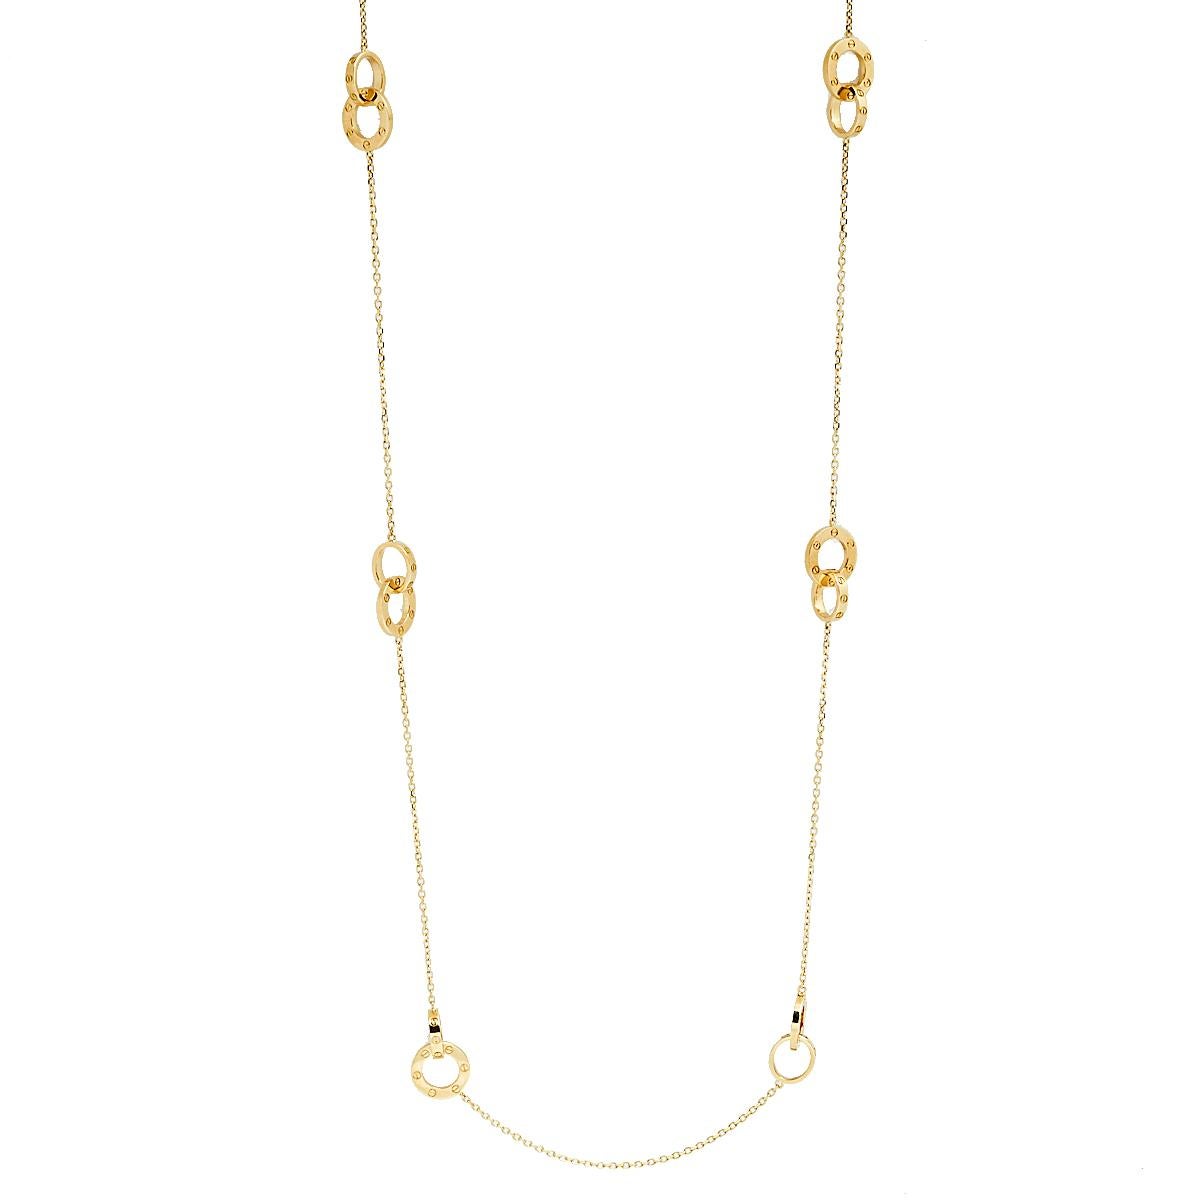 This long station necklace heralds Cartier's power to create magical pieces of jewelry. The creation is from the celebrated 'Love' line and it arrives in a harmonious gathering of interlocked rings, each one laid with the iconic screw motifs. The